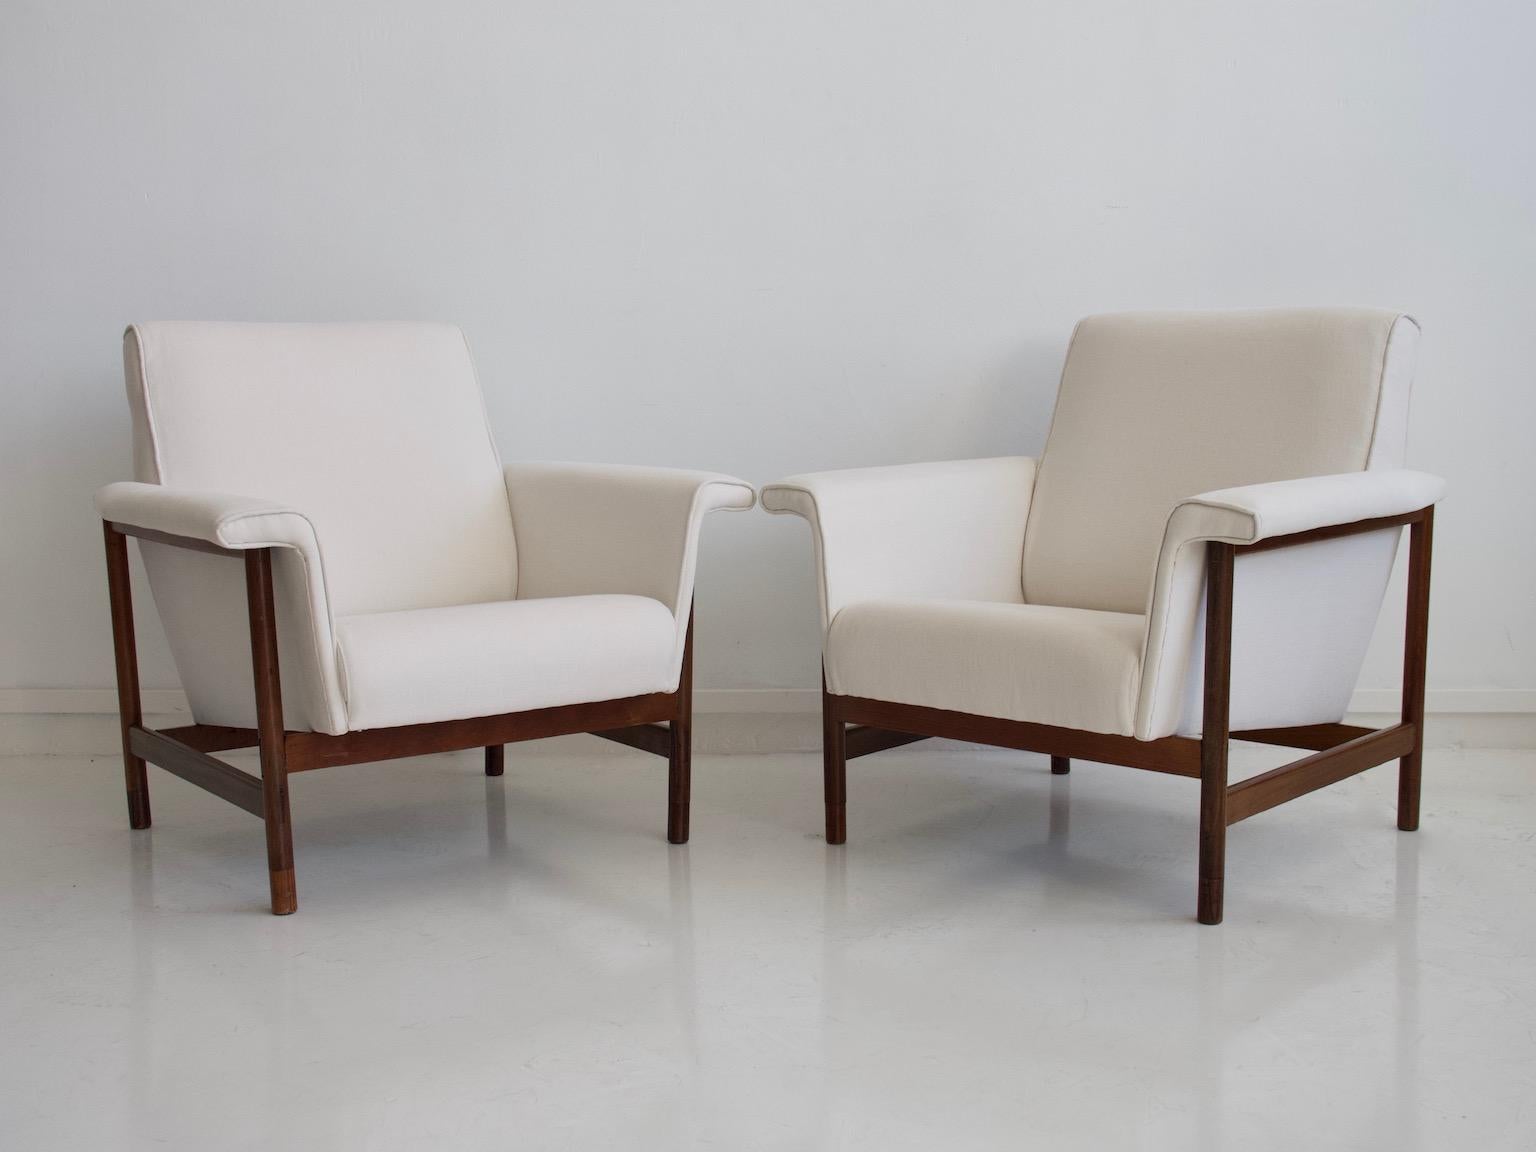 Pair of Italian armchairs from the 1960s. Frame made of teak, recently reupholstered with white fabric.